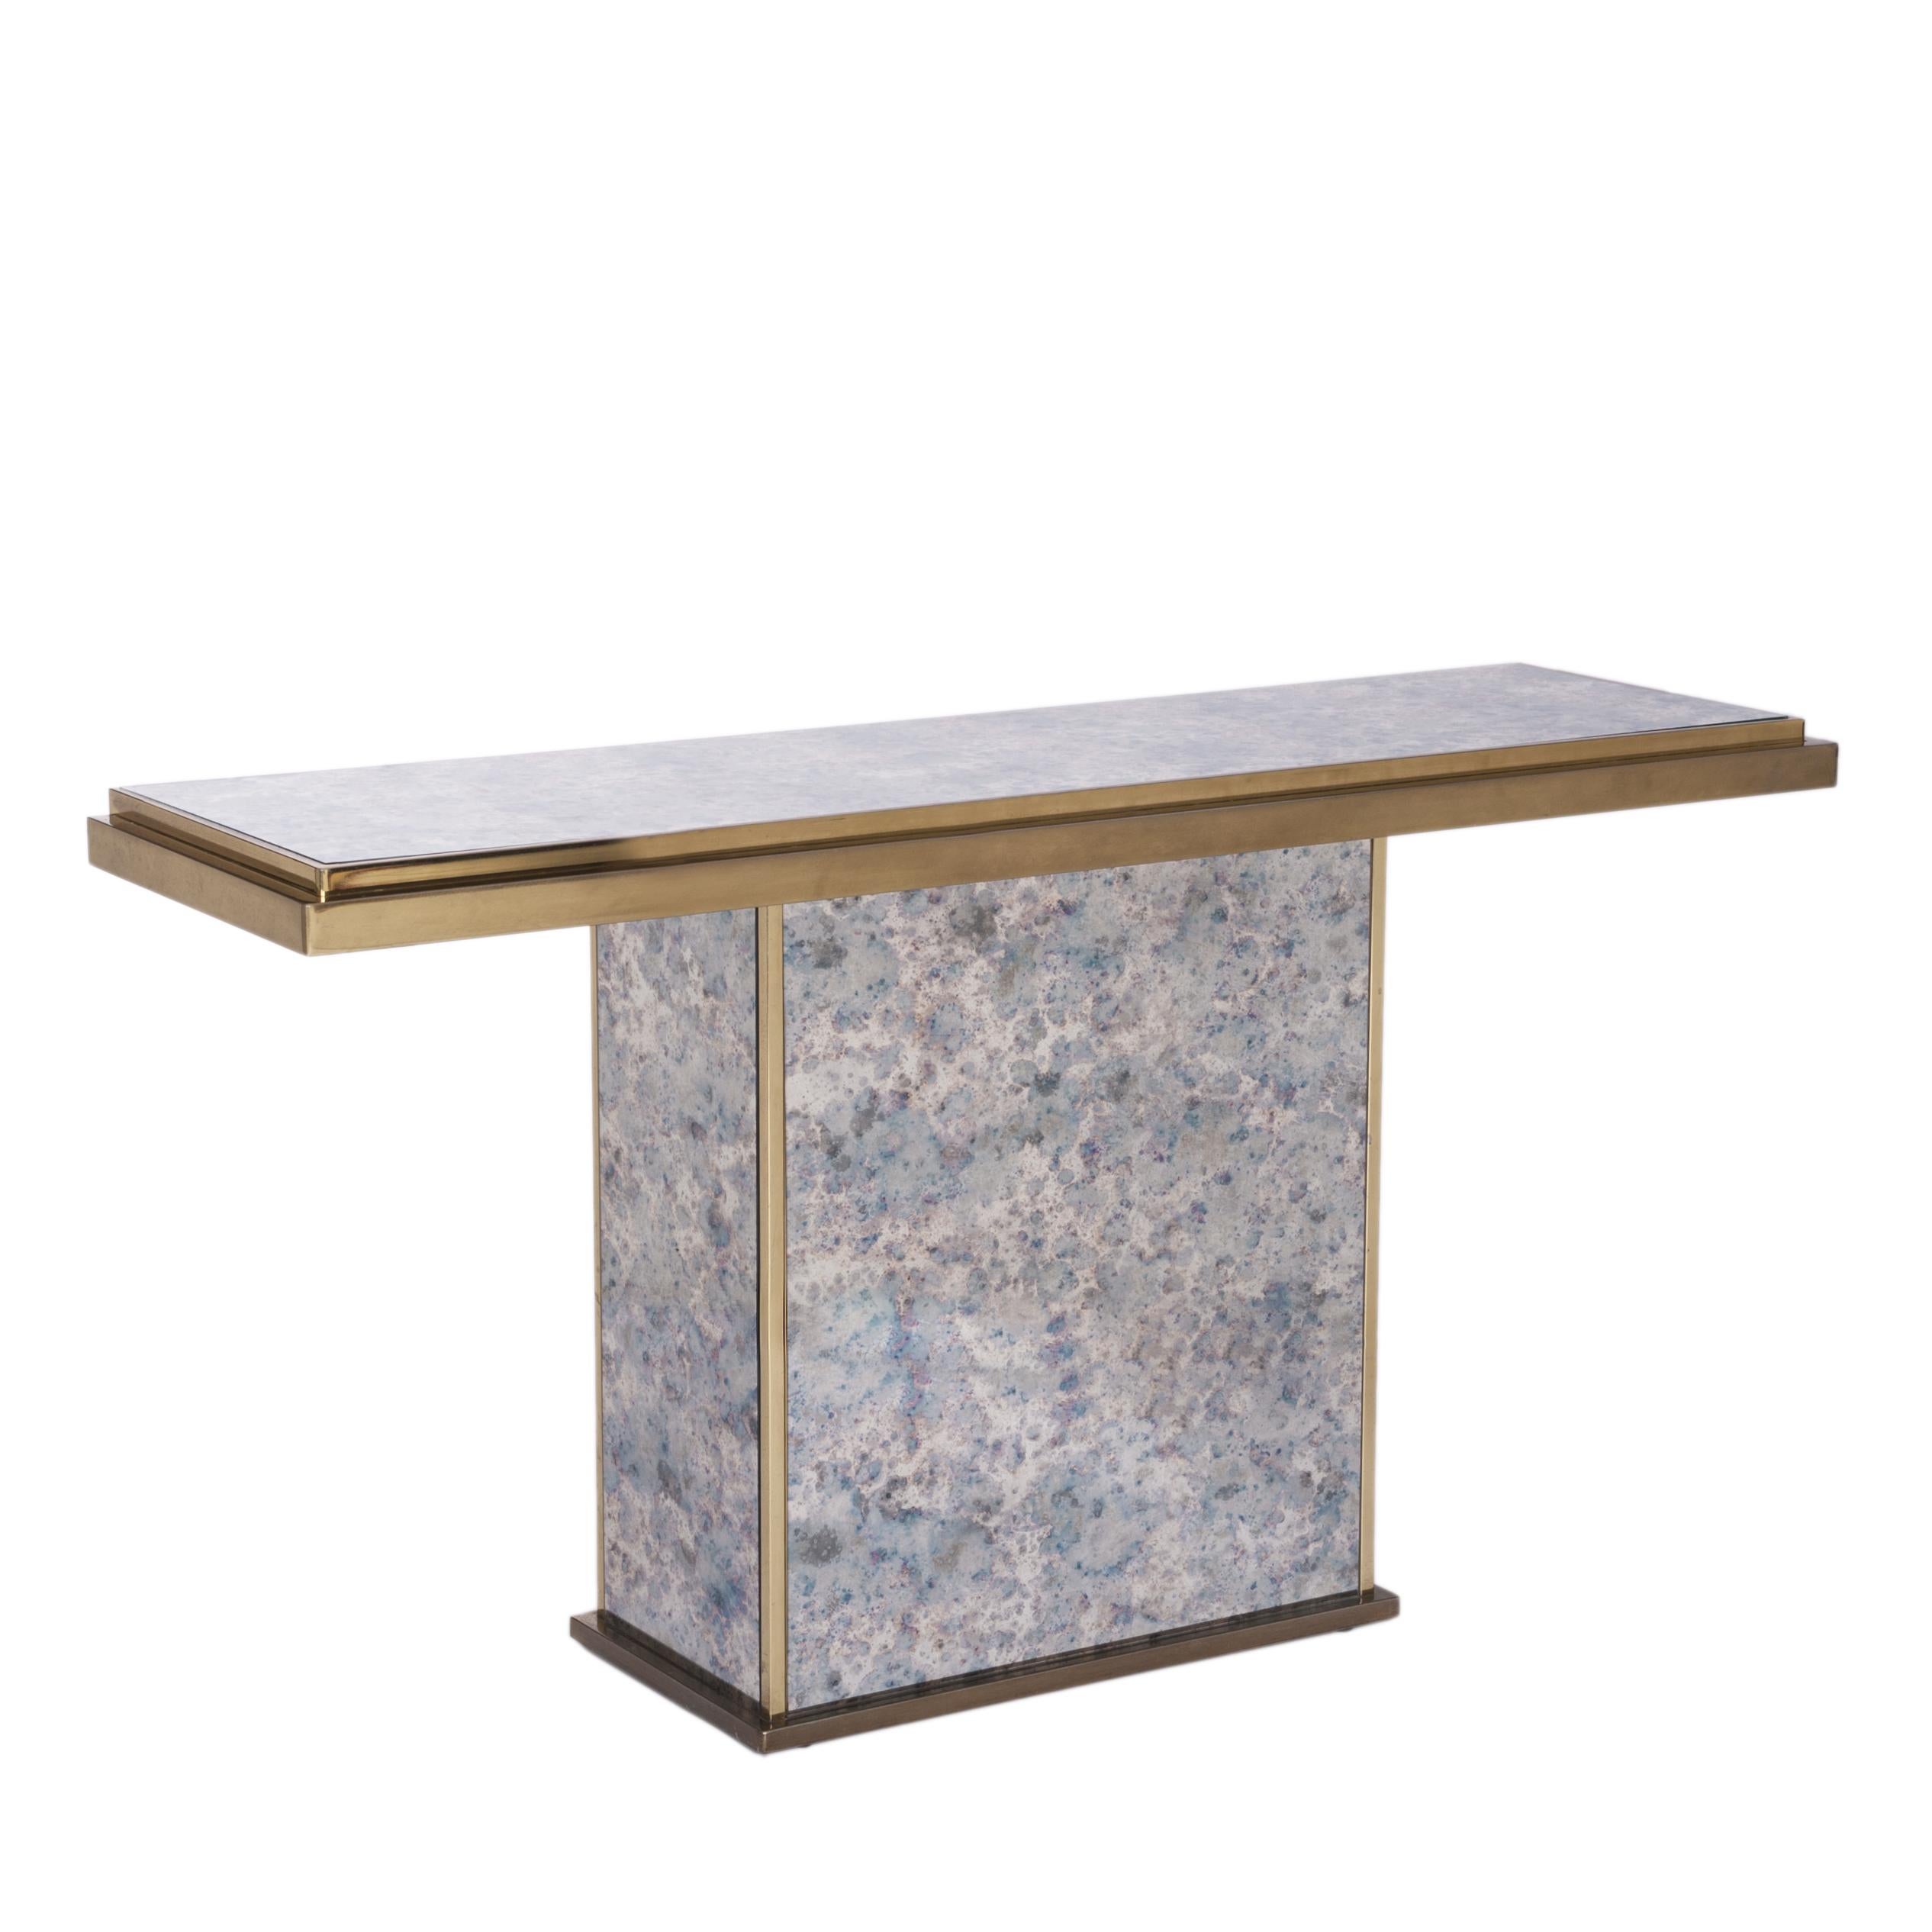 Elegant, straight-lined console table spotty mirrored surface in purple-blue-grey-bronze color.
Measures: Moulded brass table frame (3.0cm), the foot is brass bordered, too (1.5cm) the brass socle measures 2.0cm.
 